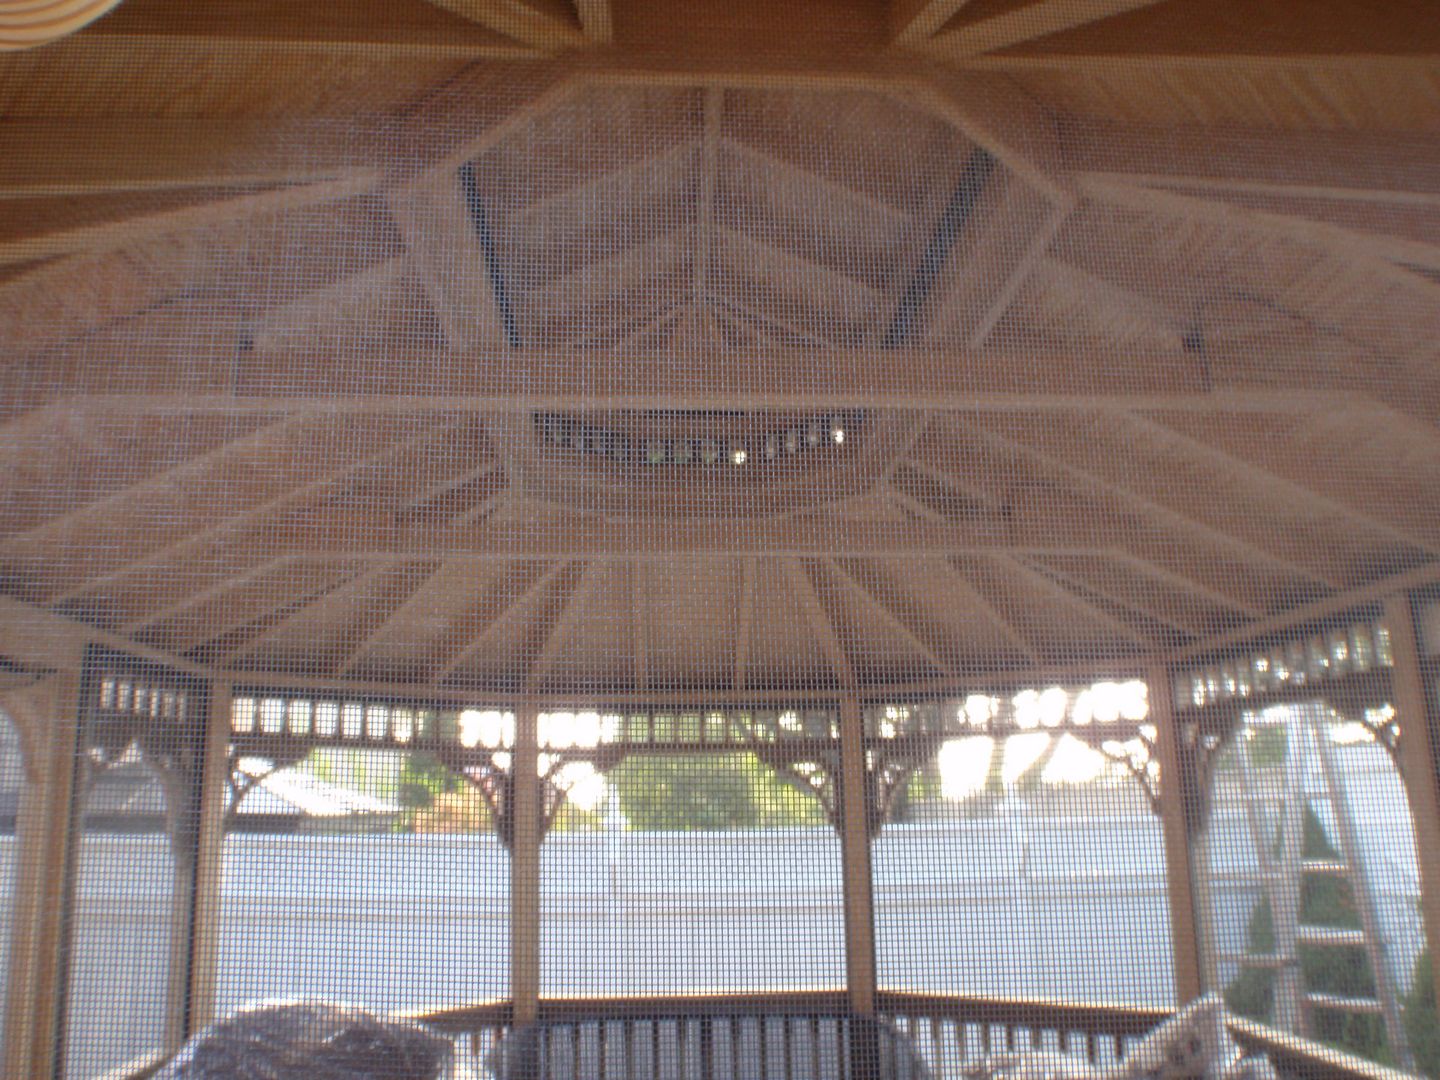 wooden 12 by 16 foot oval gazebo interior